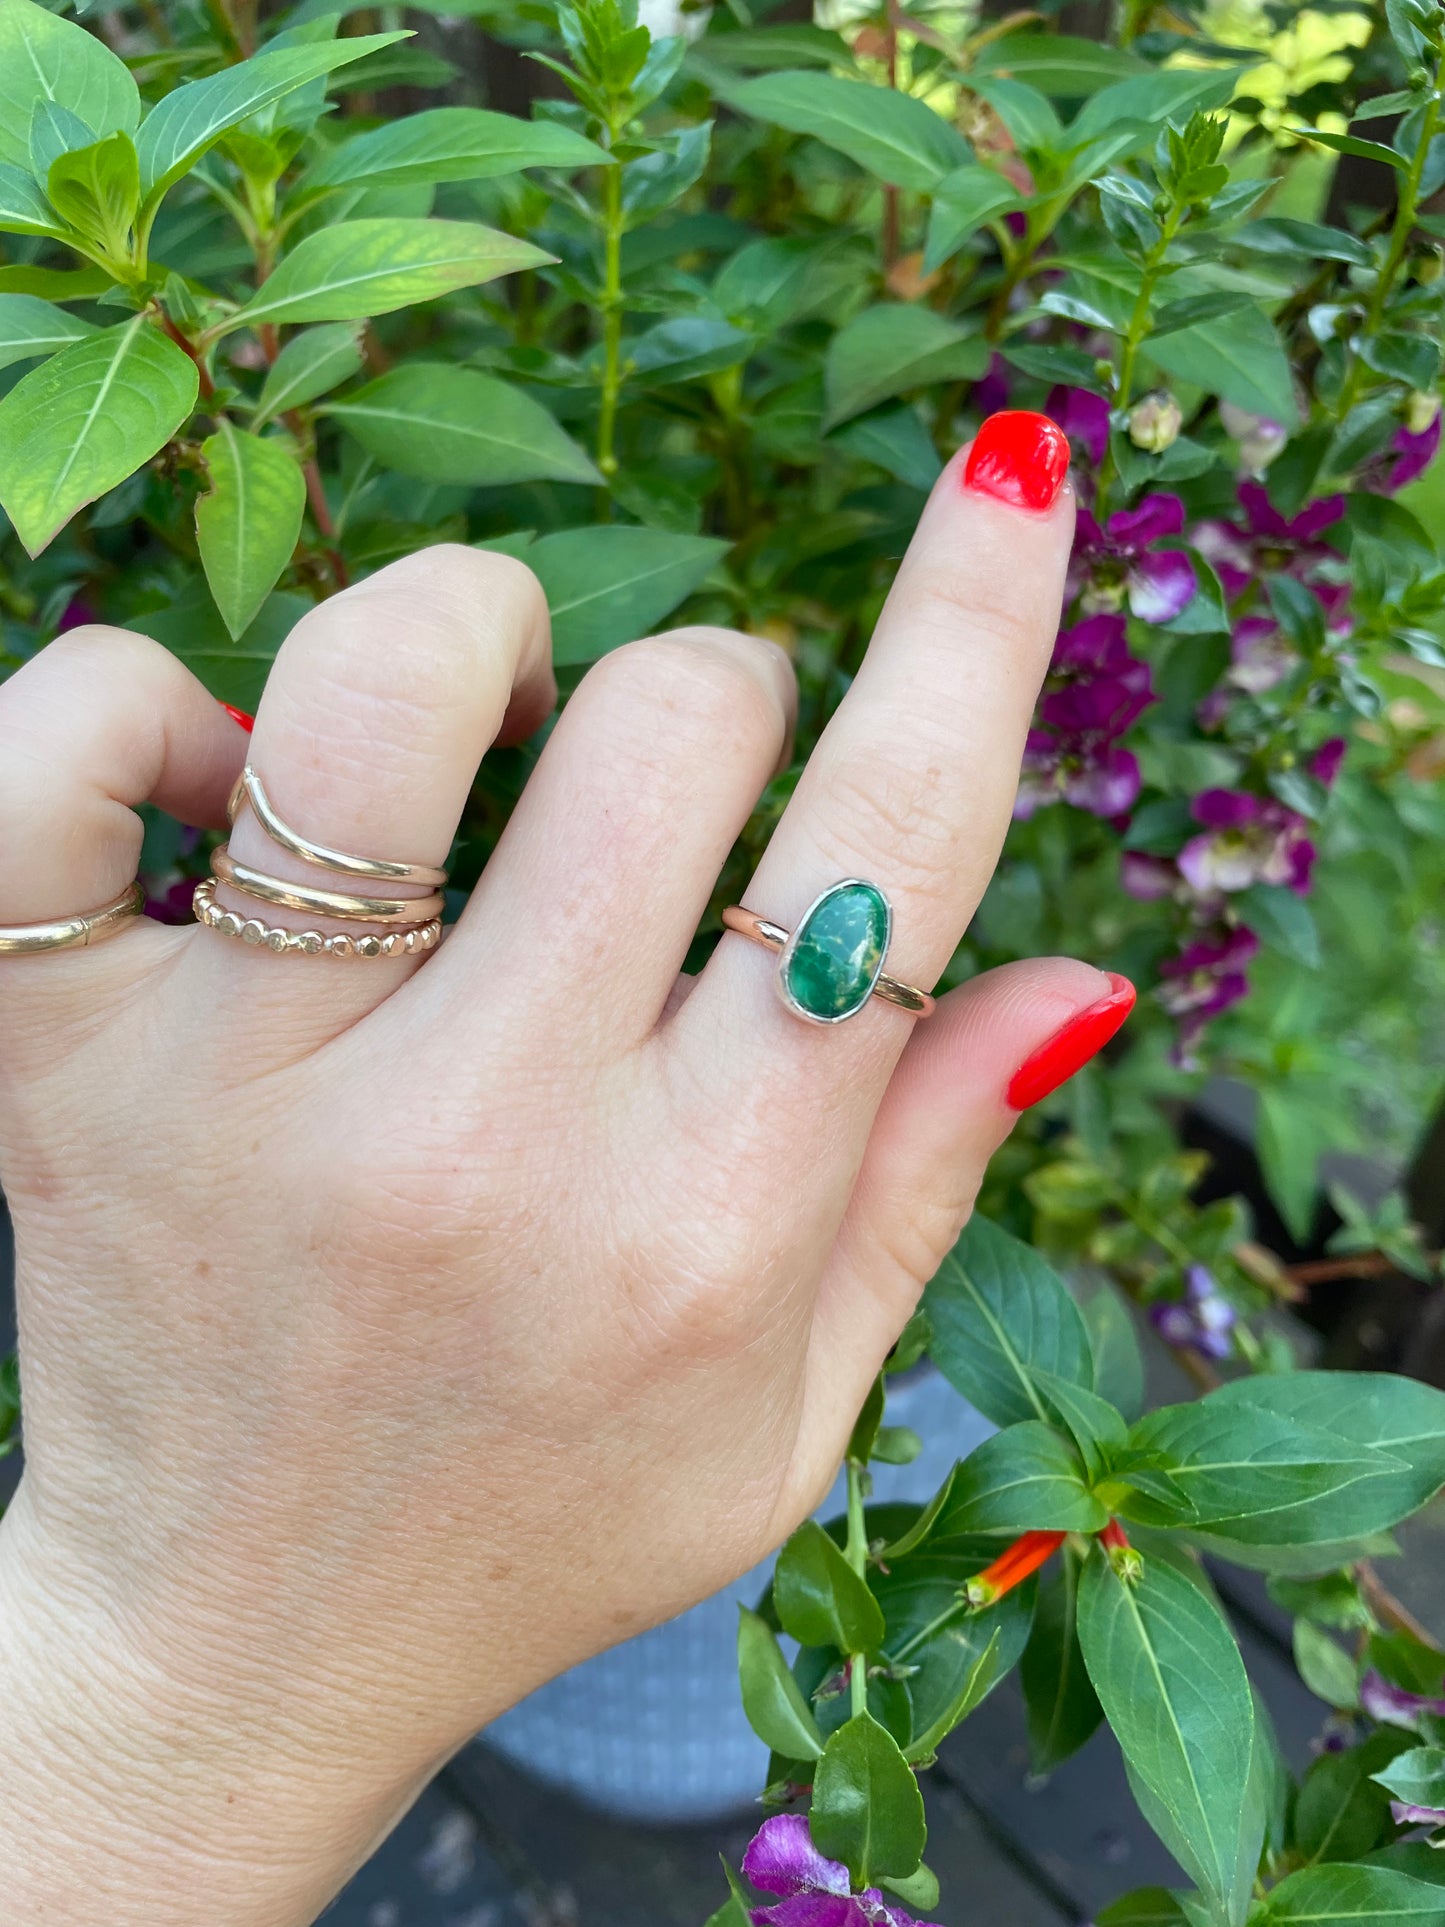 Sonoran Gold Turquoise Ring - Size 6 3/4